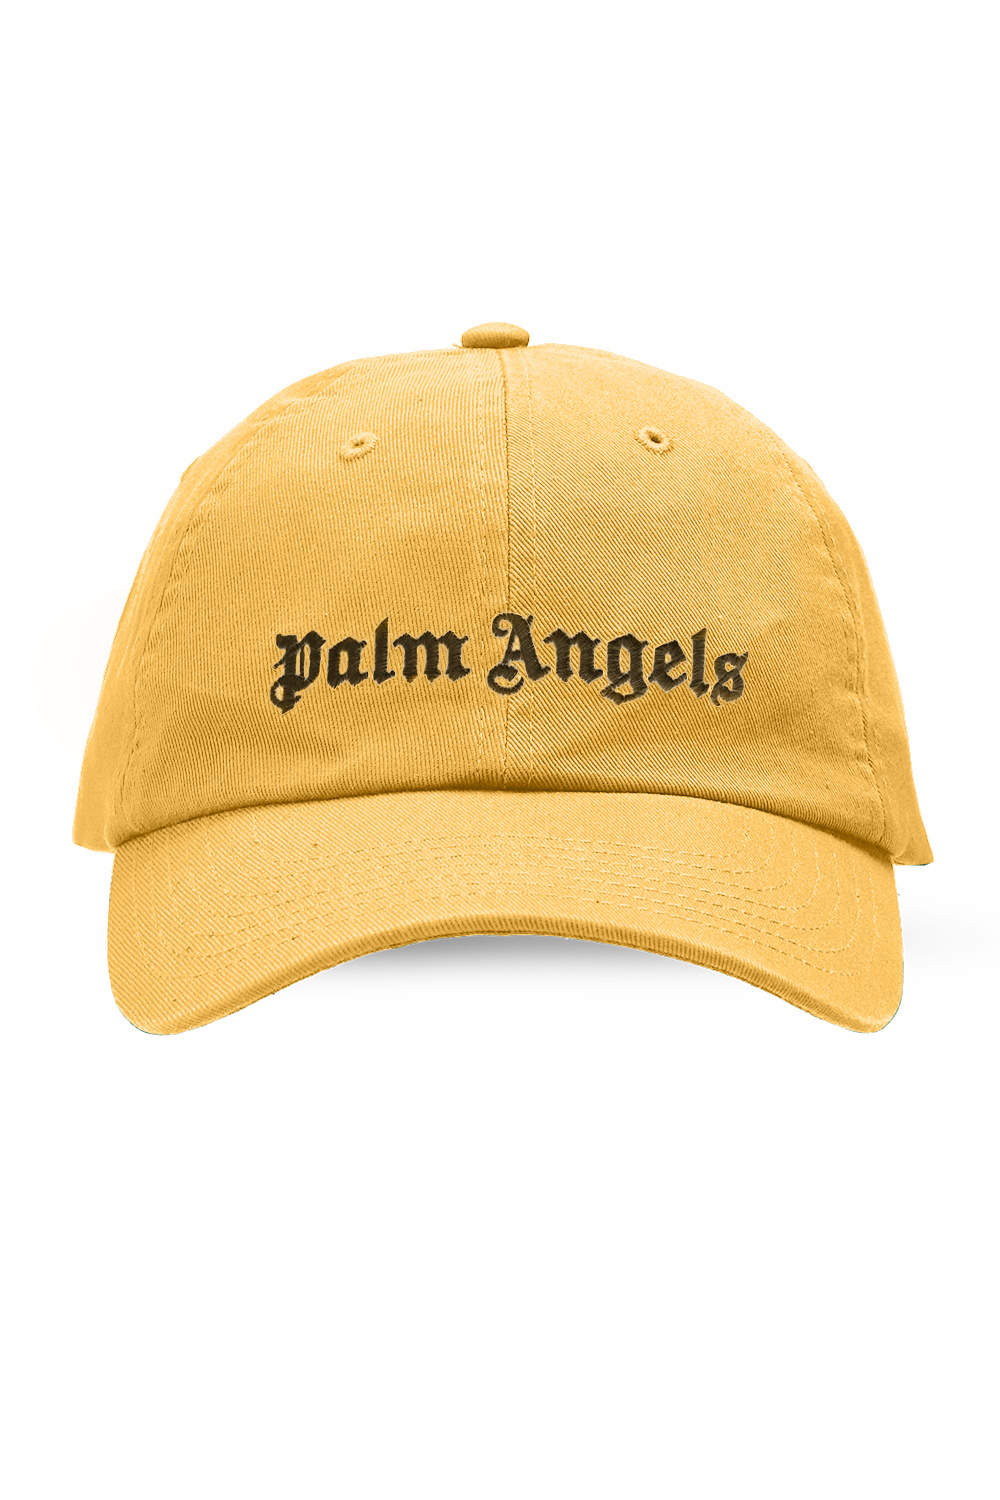 Palm Angels clothing caps Silver Loafers